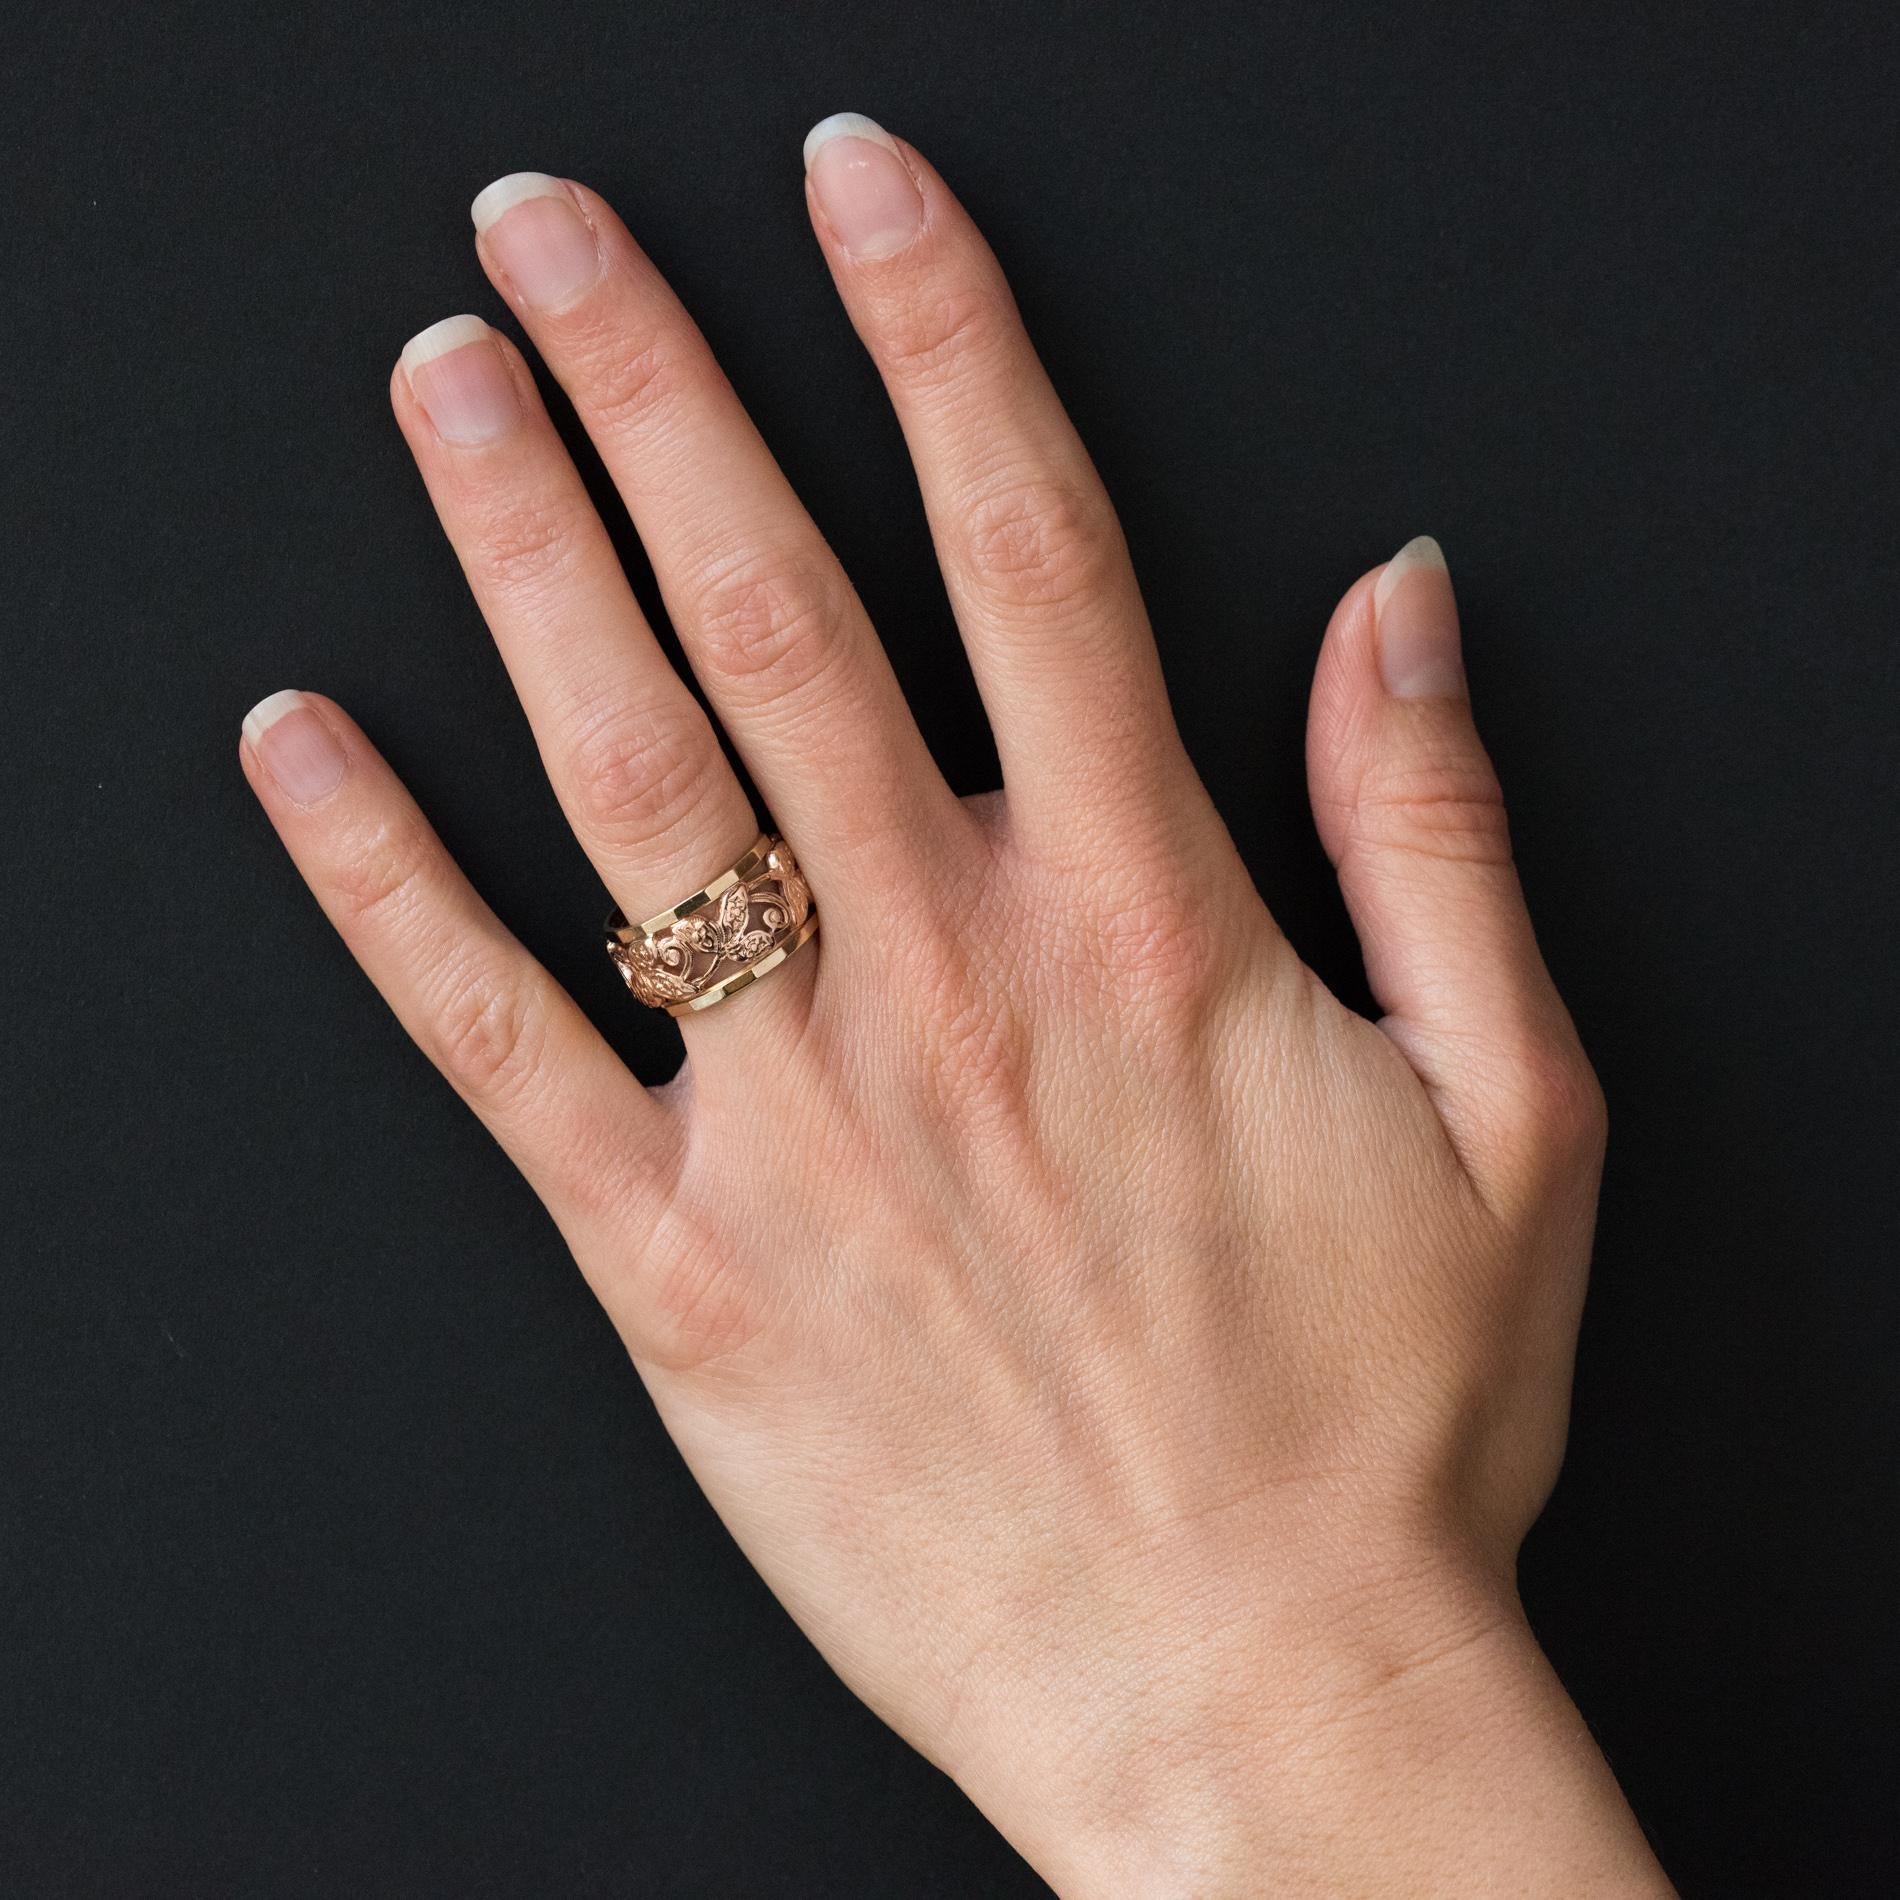 Ring in 14 karats rose gold.
Lovely wedding ring, it is composed of a plant decoration chiseled and perforated in its center.
Height: 1.3 cm, thickness: 0.75 mm.
Total weight of the jewel: approximately 5.2 g.
Authentic antique ring - 1960s American